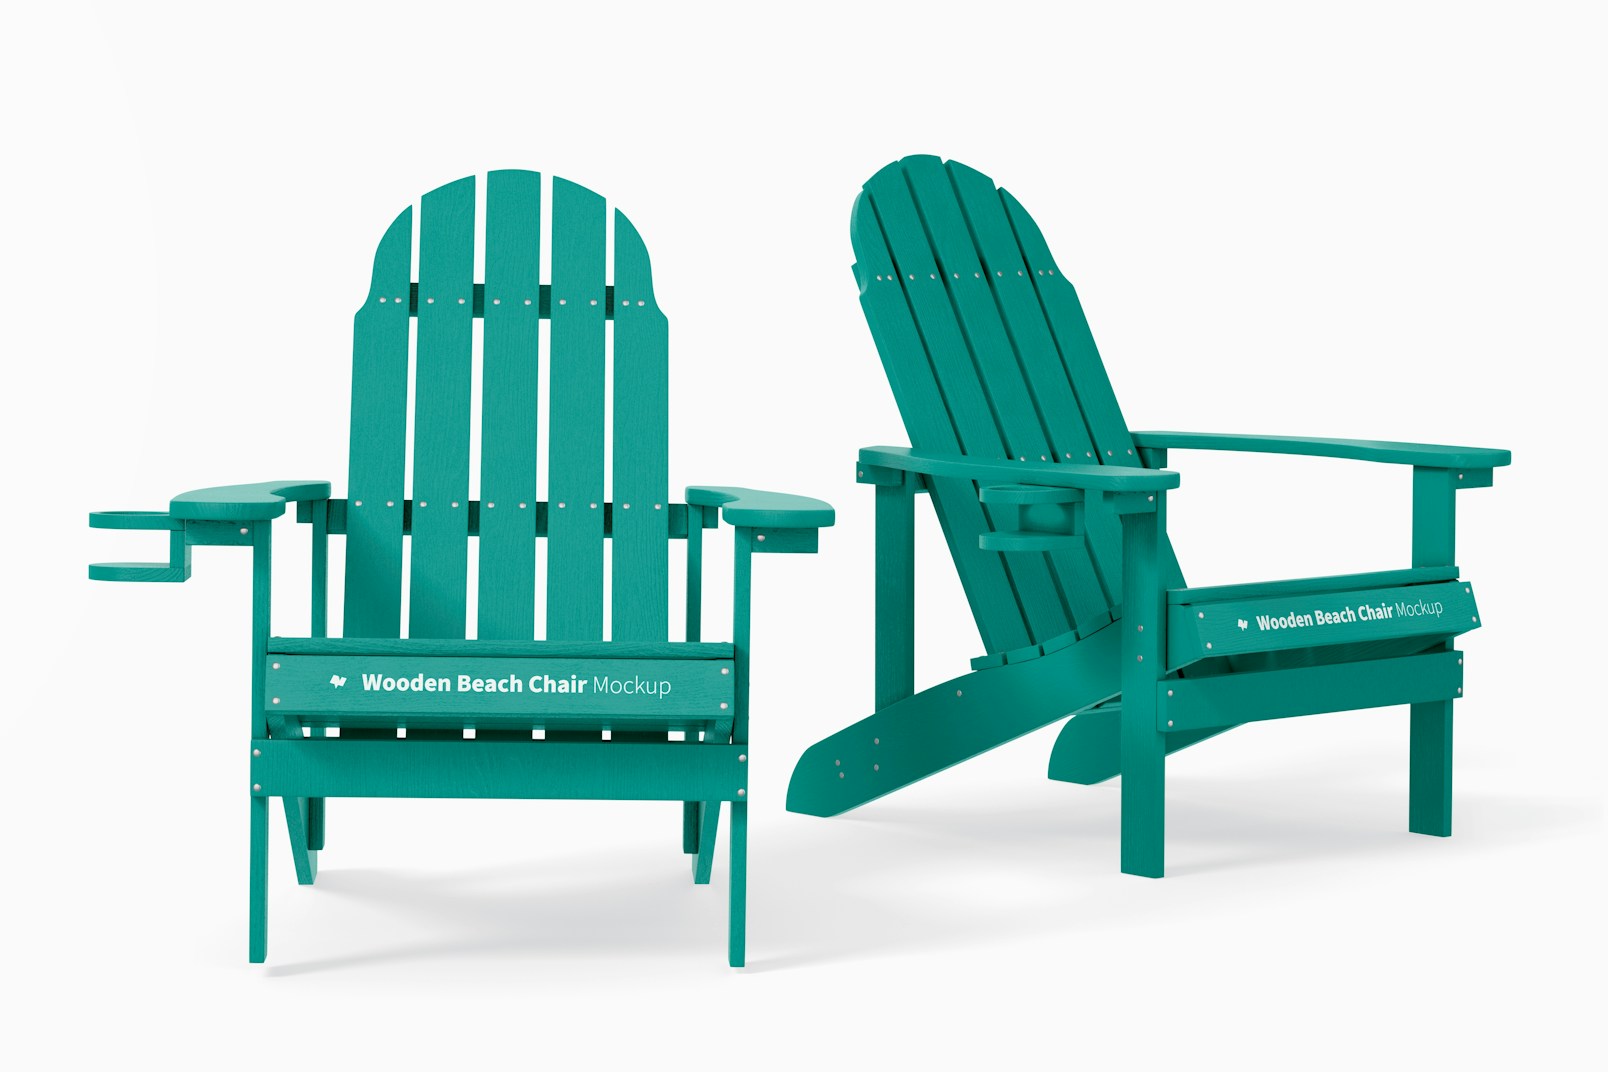 Wooden Beach Chairs Mockup, Perspective